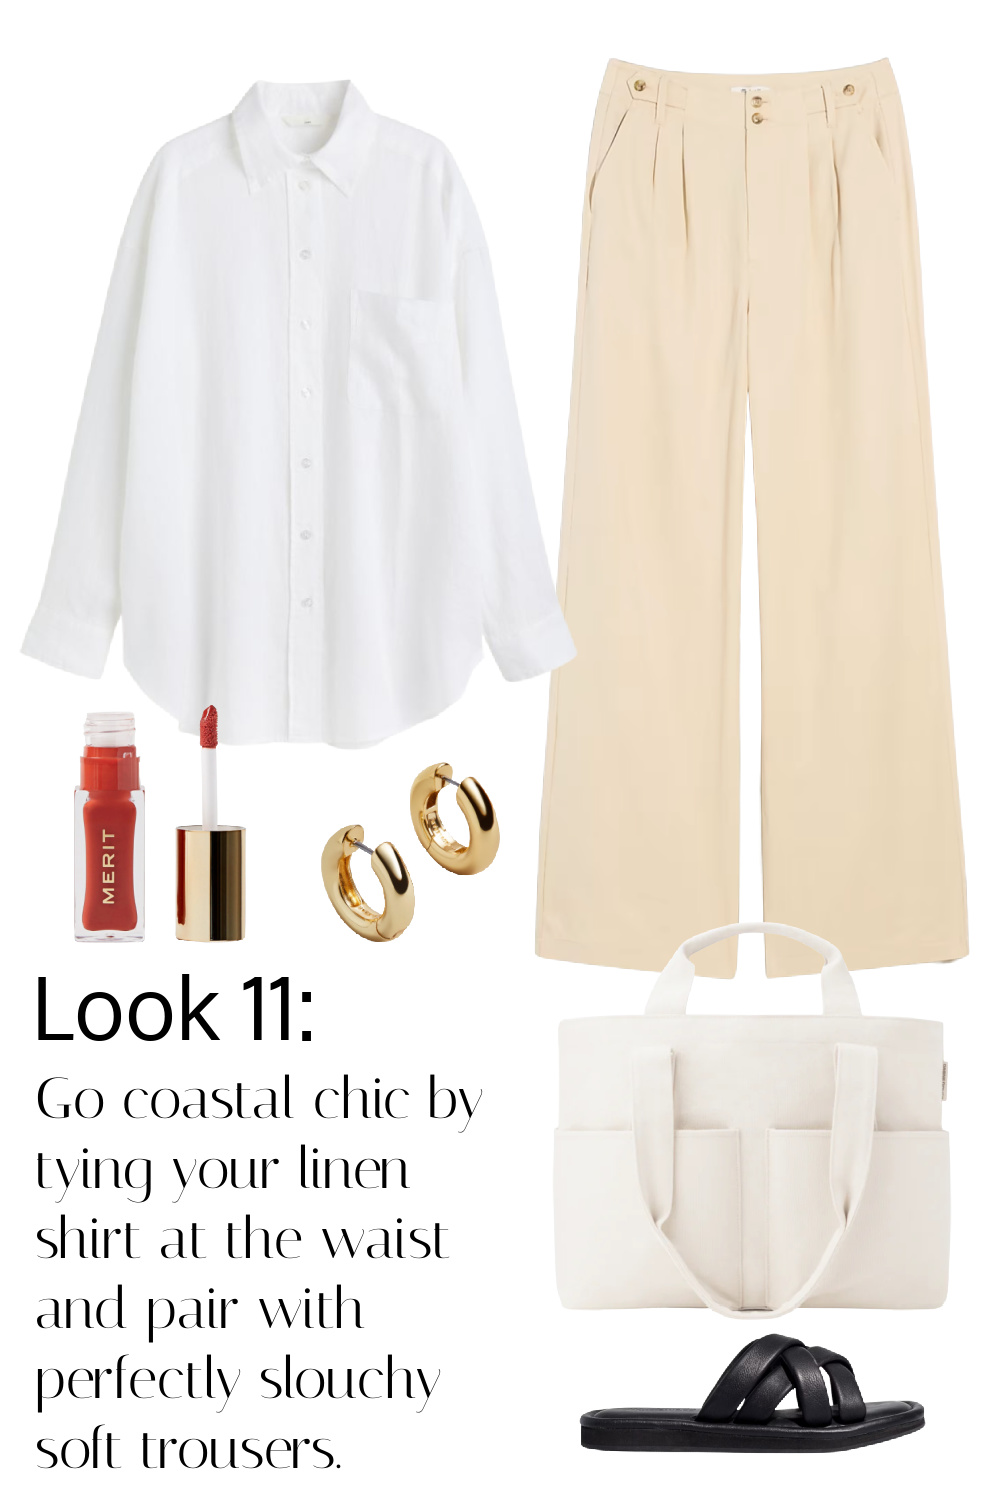 The white linen shirt is paired with the wide leg khaki trousers. Go coastal chic by tying your linen shirt at the waist and pair with perfectly slouchy soft trousers.